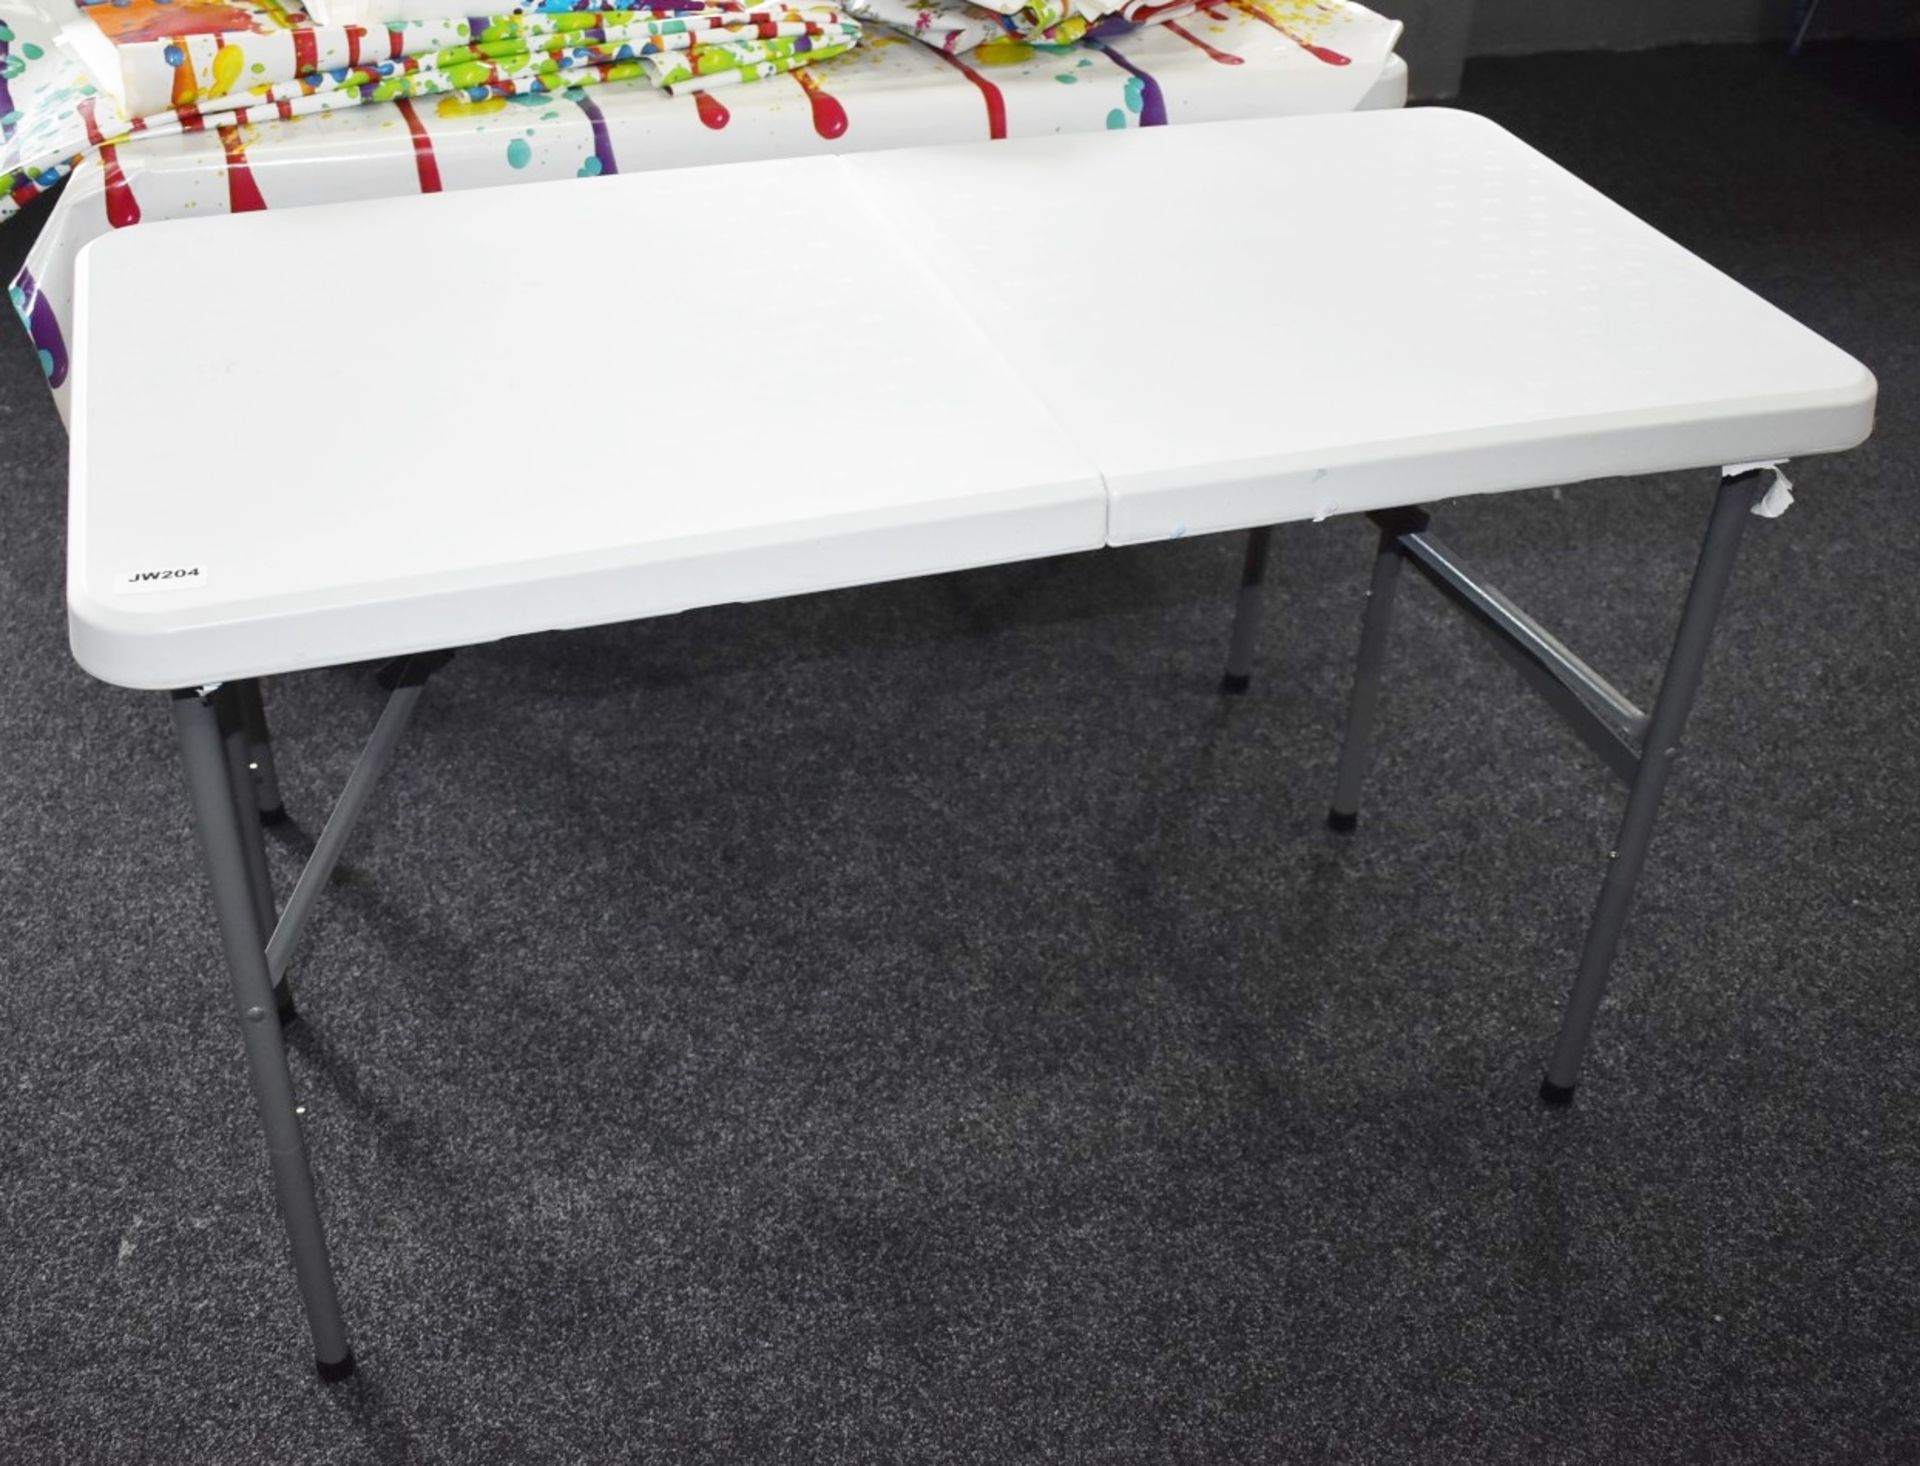 1 x Rectangle Foldable Poly Table - H76 x W120 x D59 cms - Ideal For Schools, Canteens, Offices